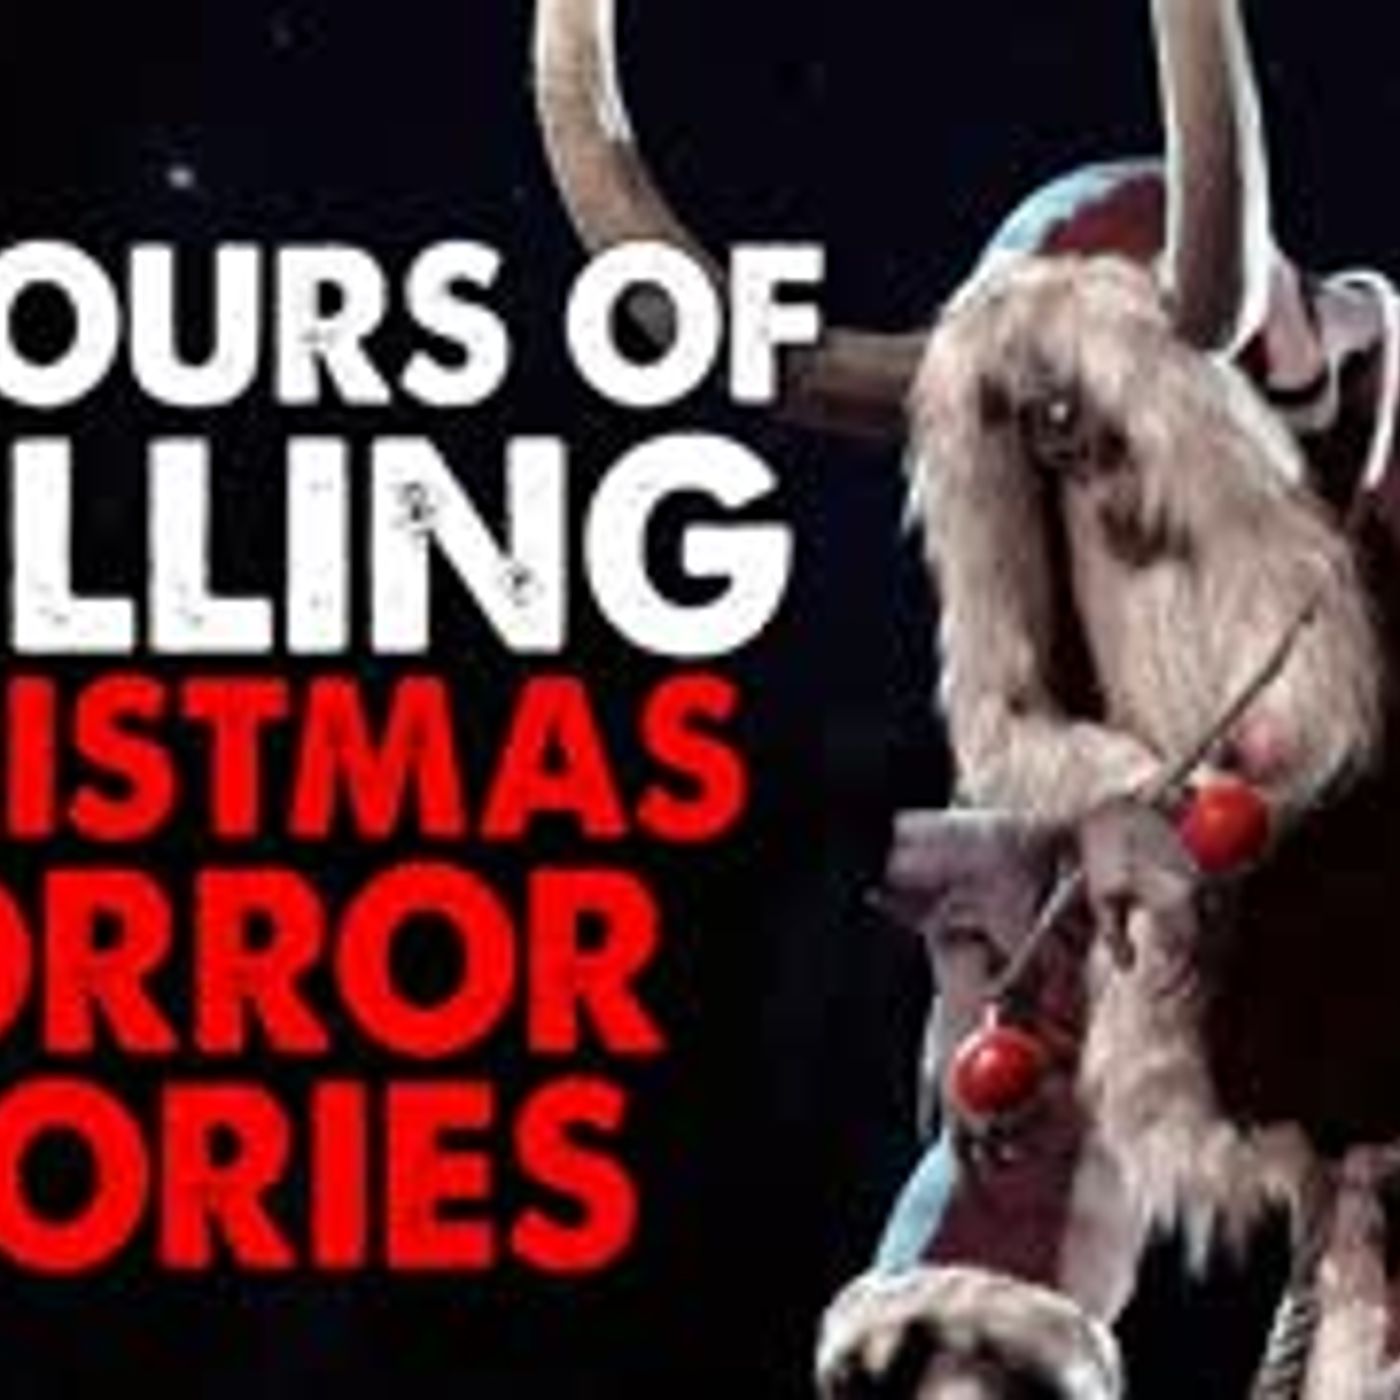 2+ Hours of CHILLING Christmas Horror Stories to relax to while unwrapping your new PS5 I hope